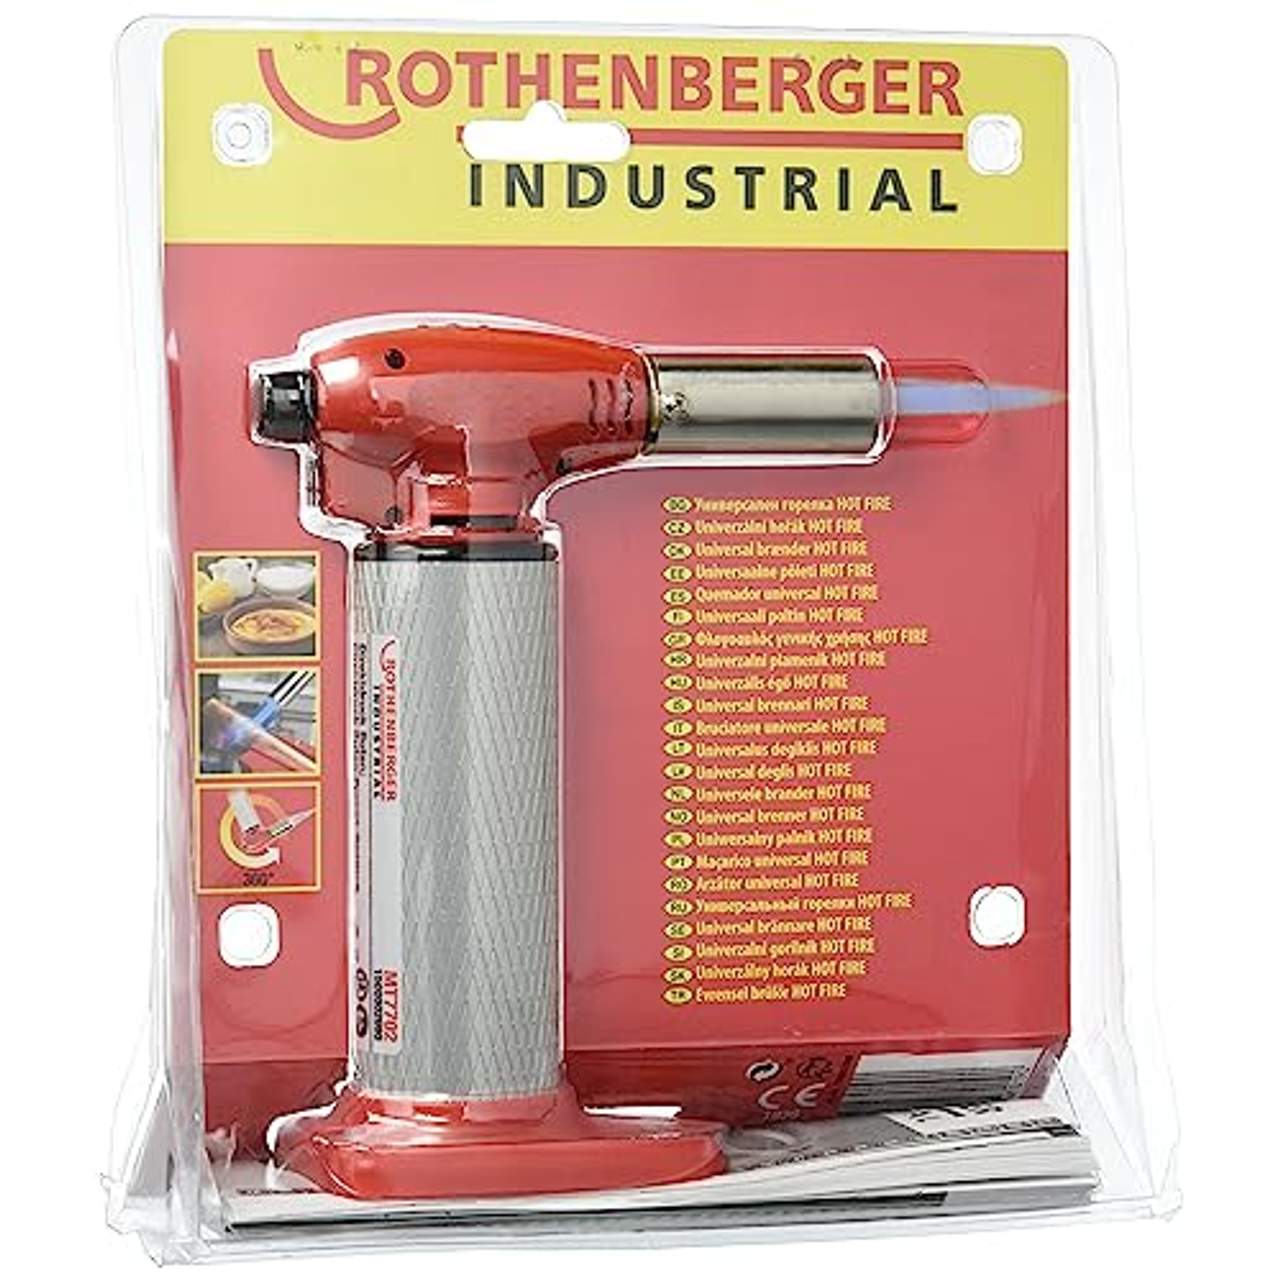 Rothenberger Industrial Flambierbrenner